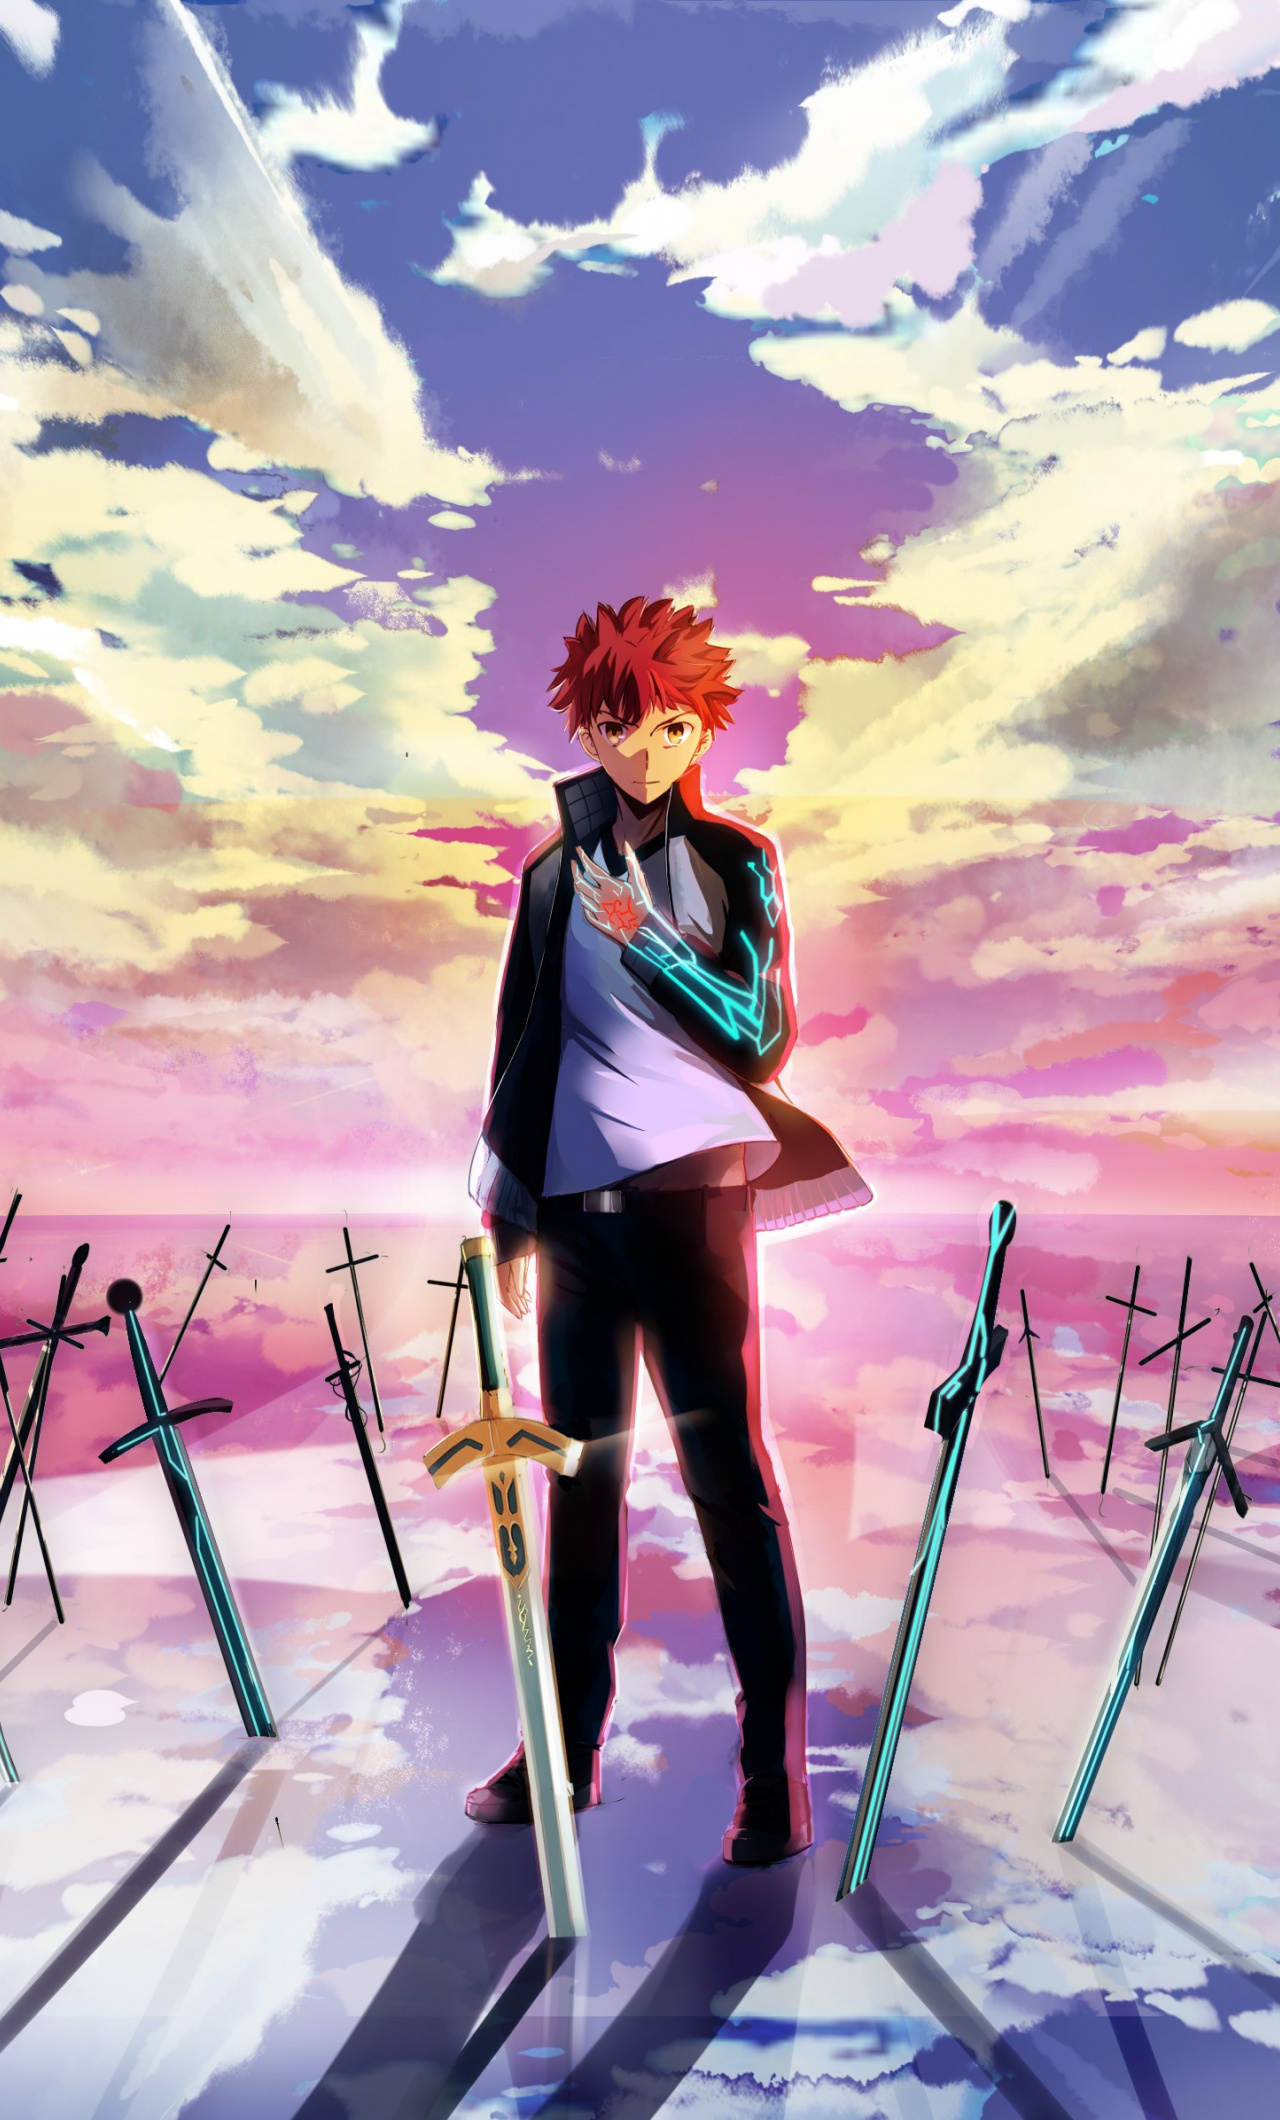 Anime Boys With Sword Wallpapers